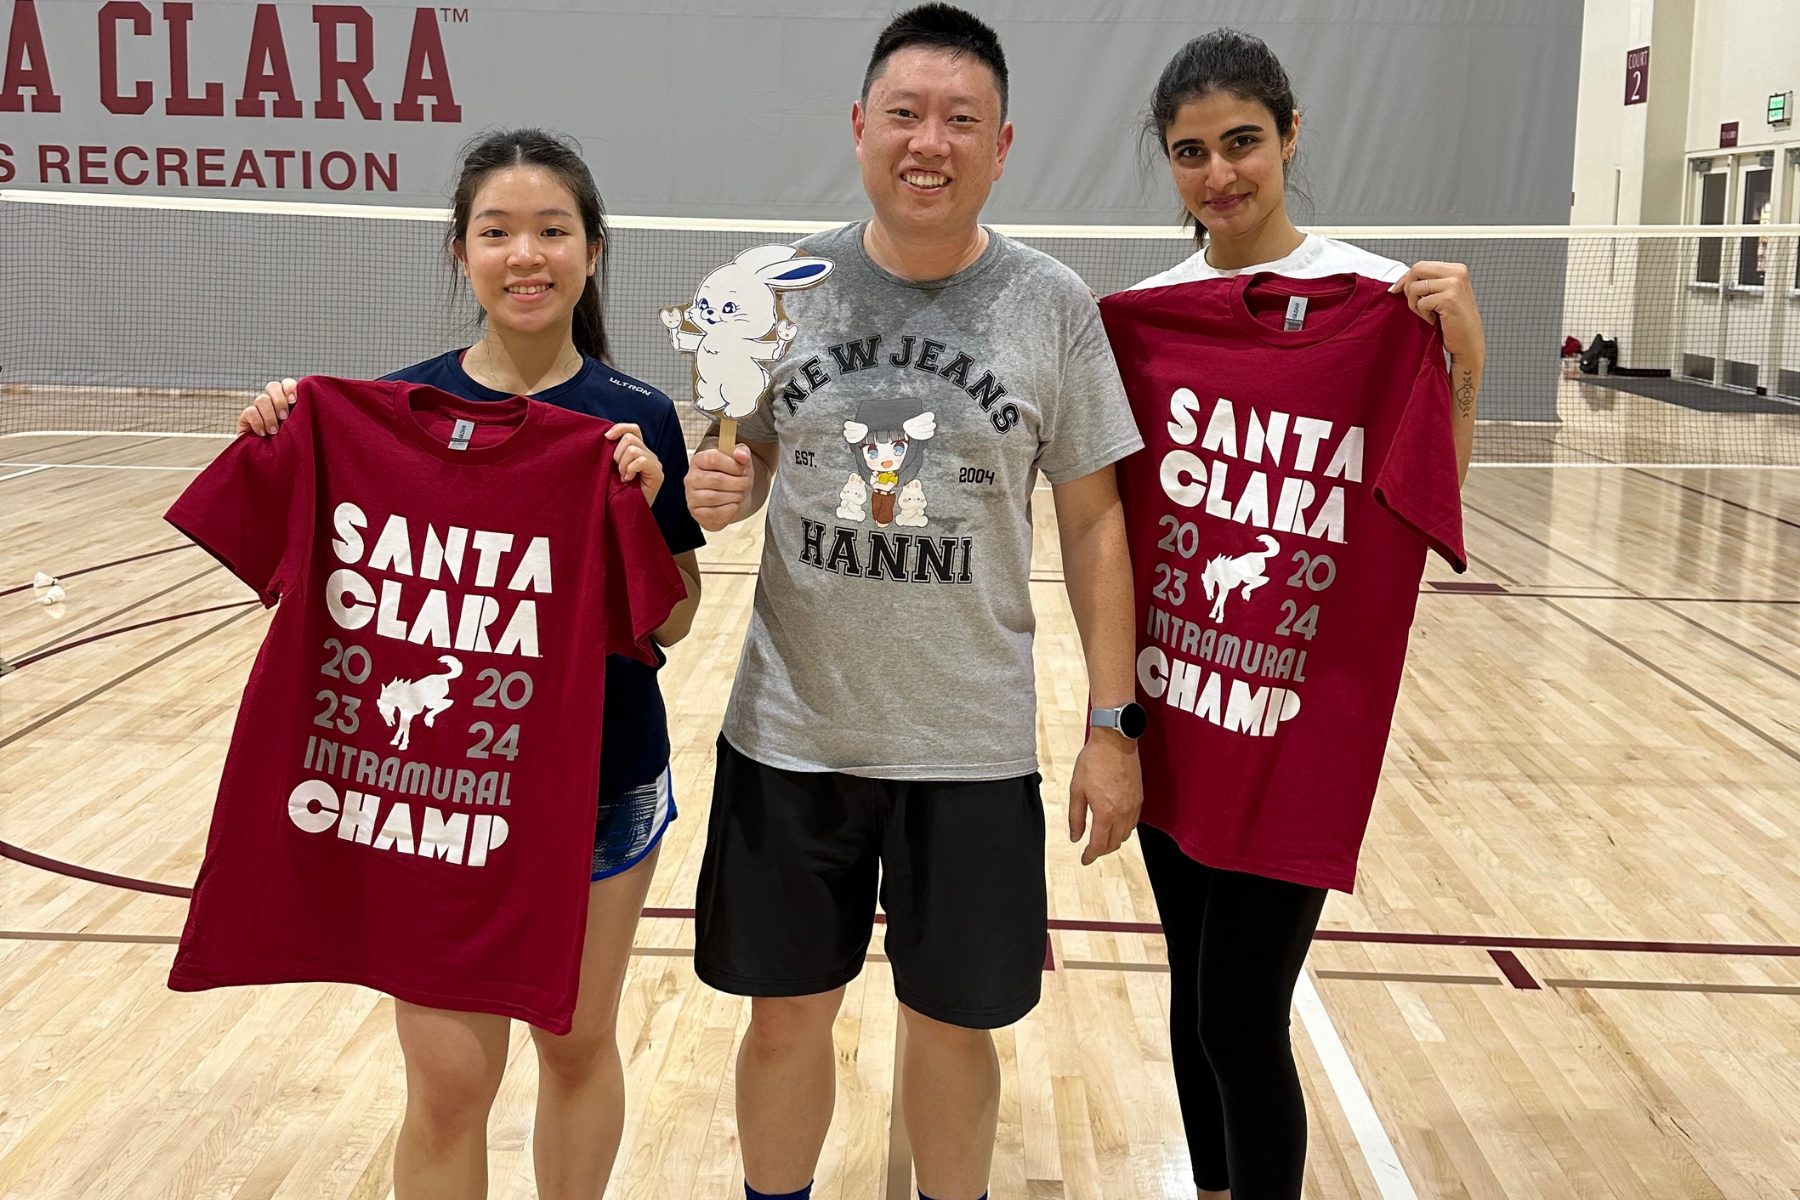 Spring 2023 pickleball winners Angel and Tony posing for photo with IM champ t-shirts